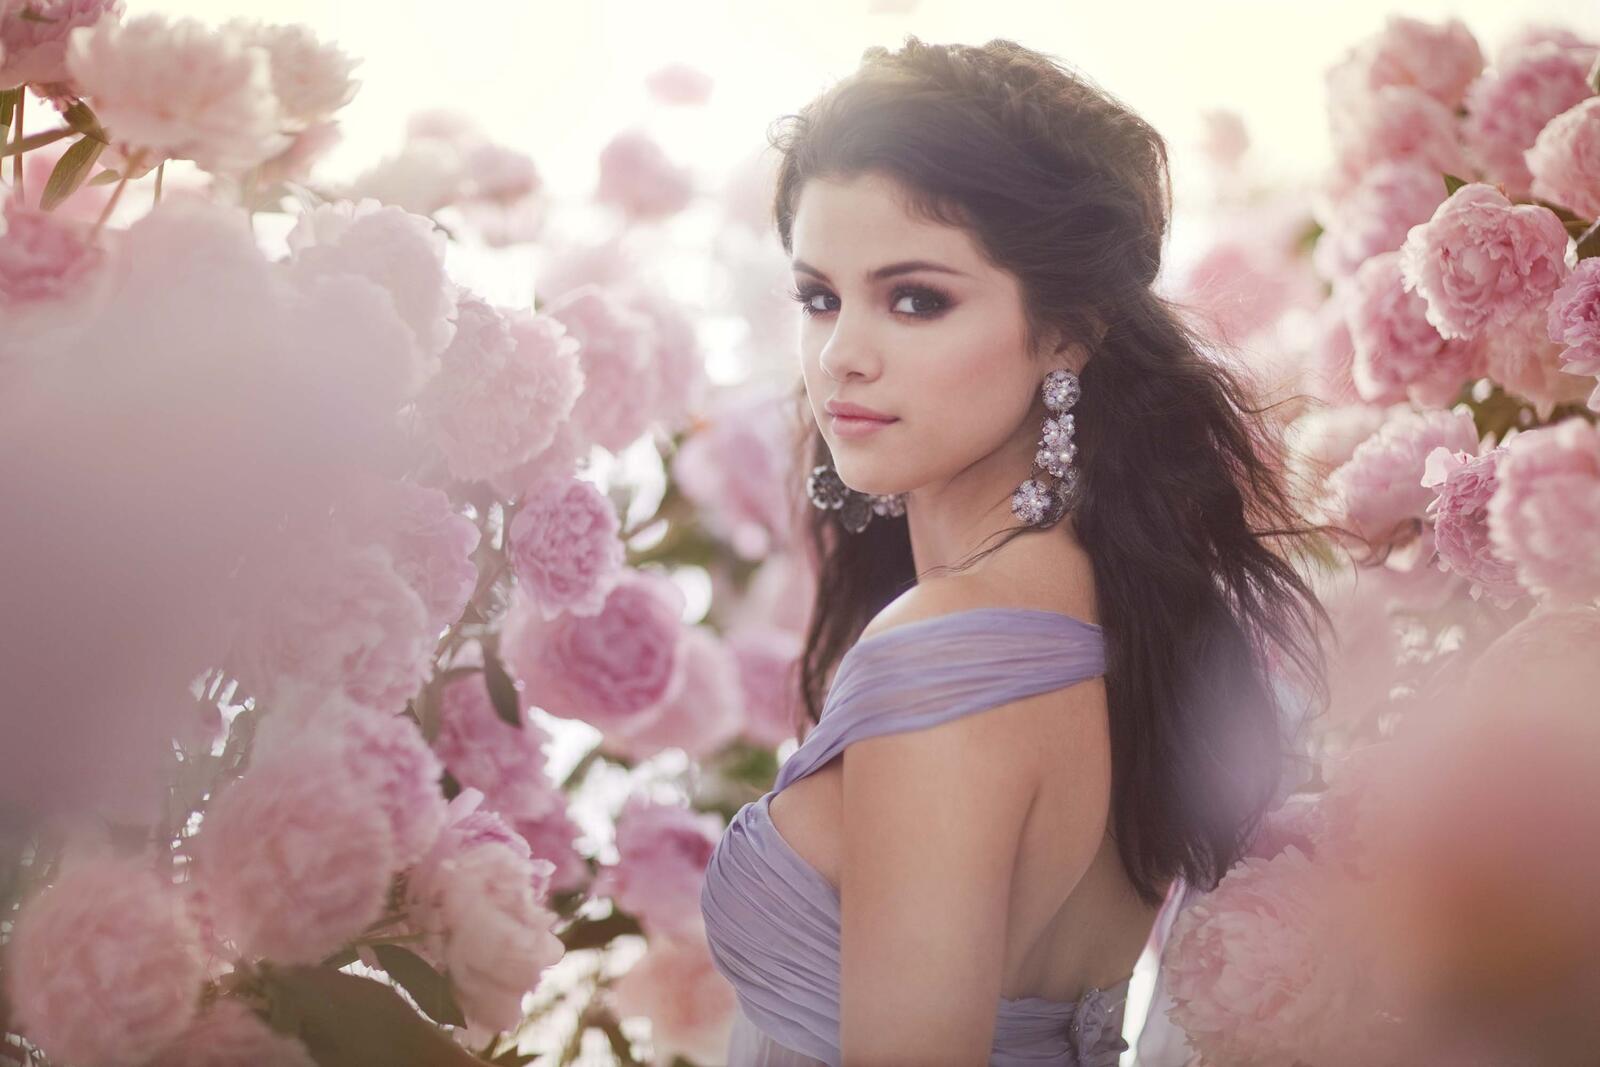 Free photo Selena Gomez in the garden with pink flowers